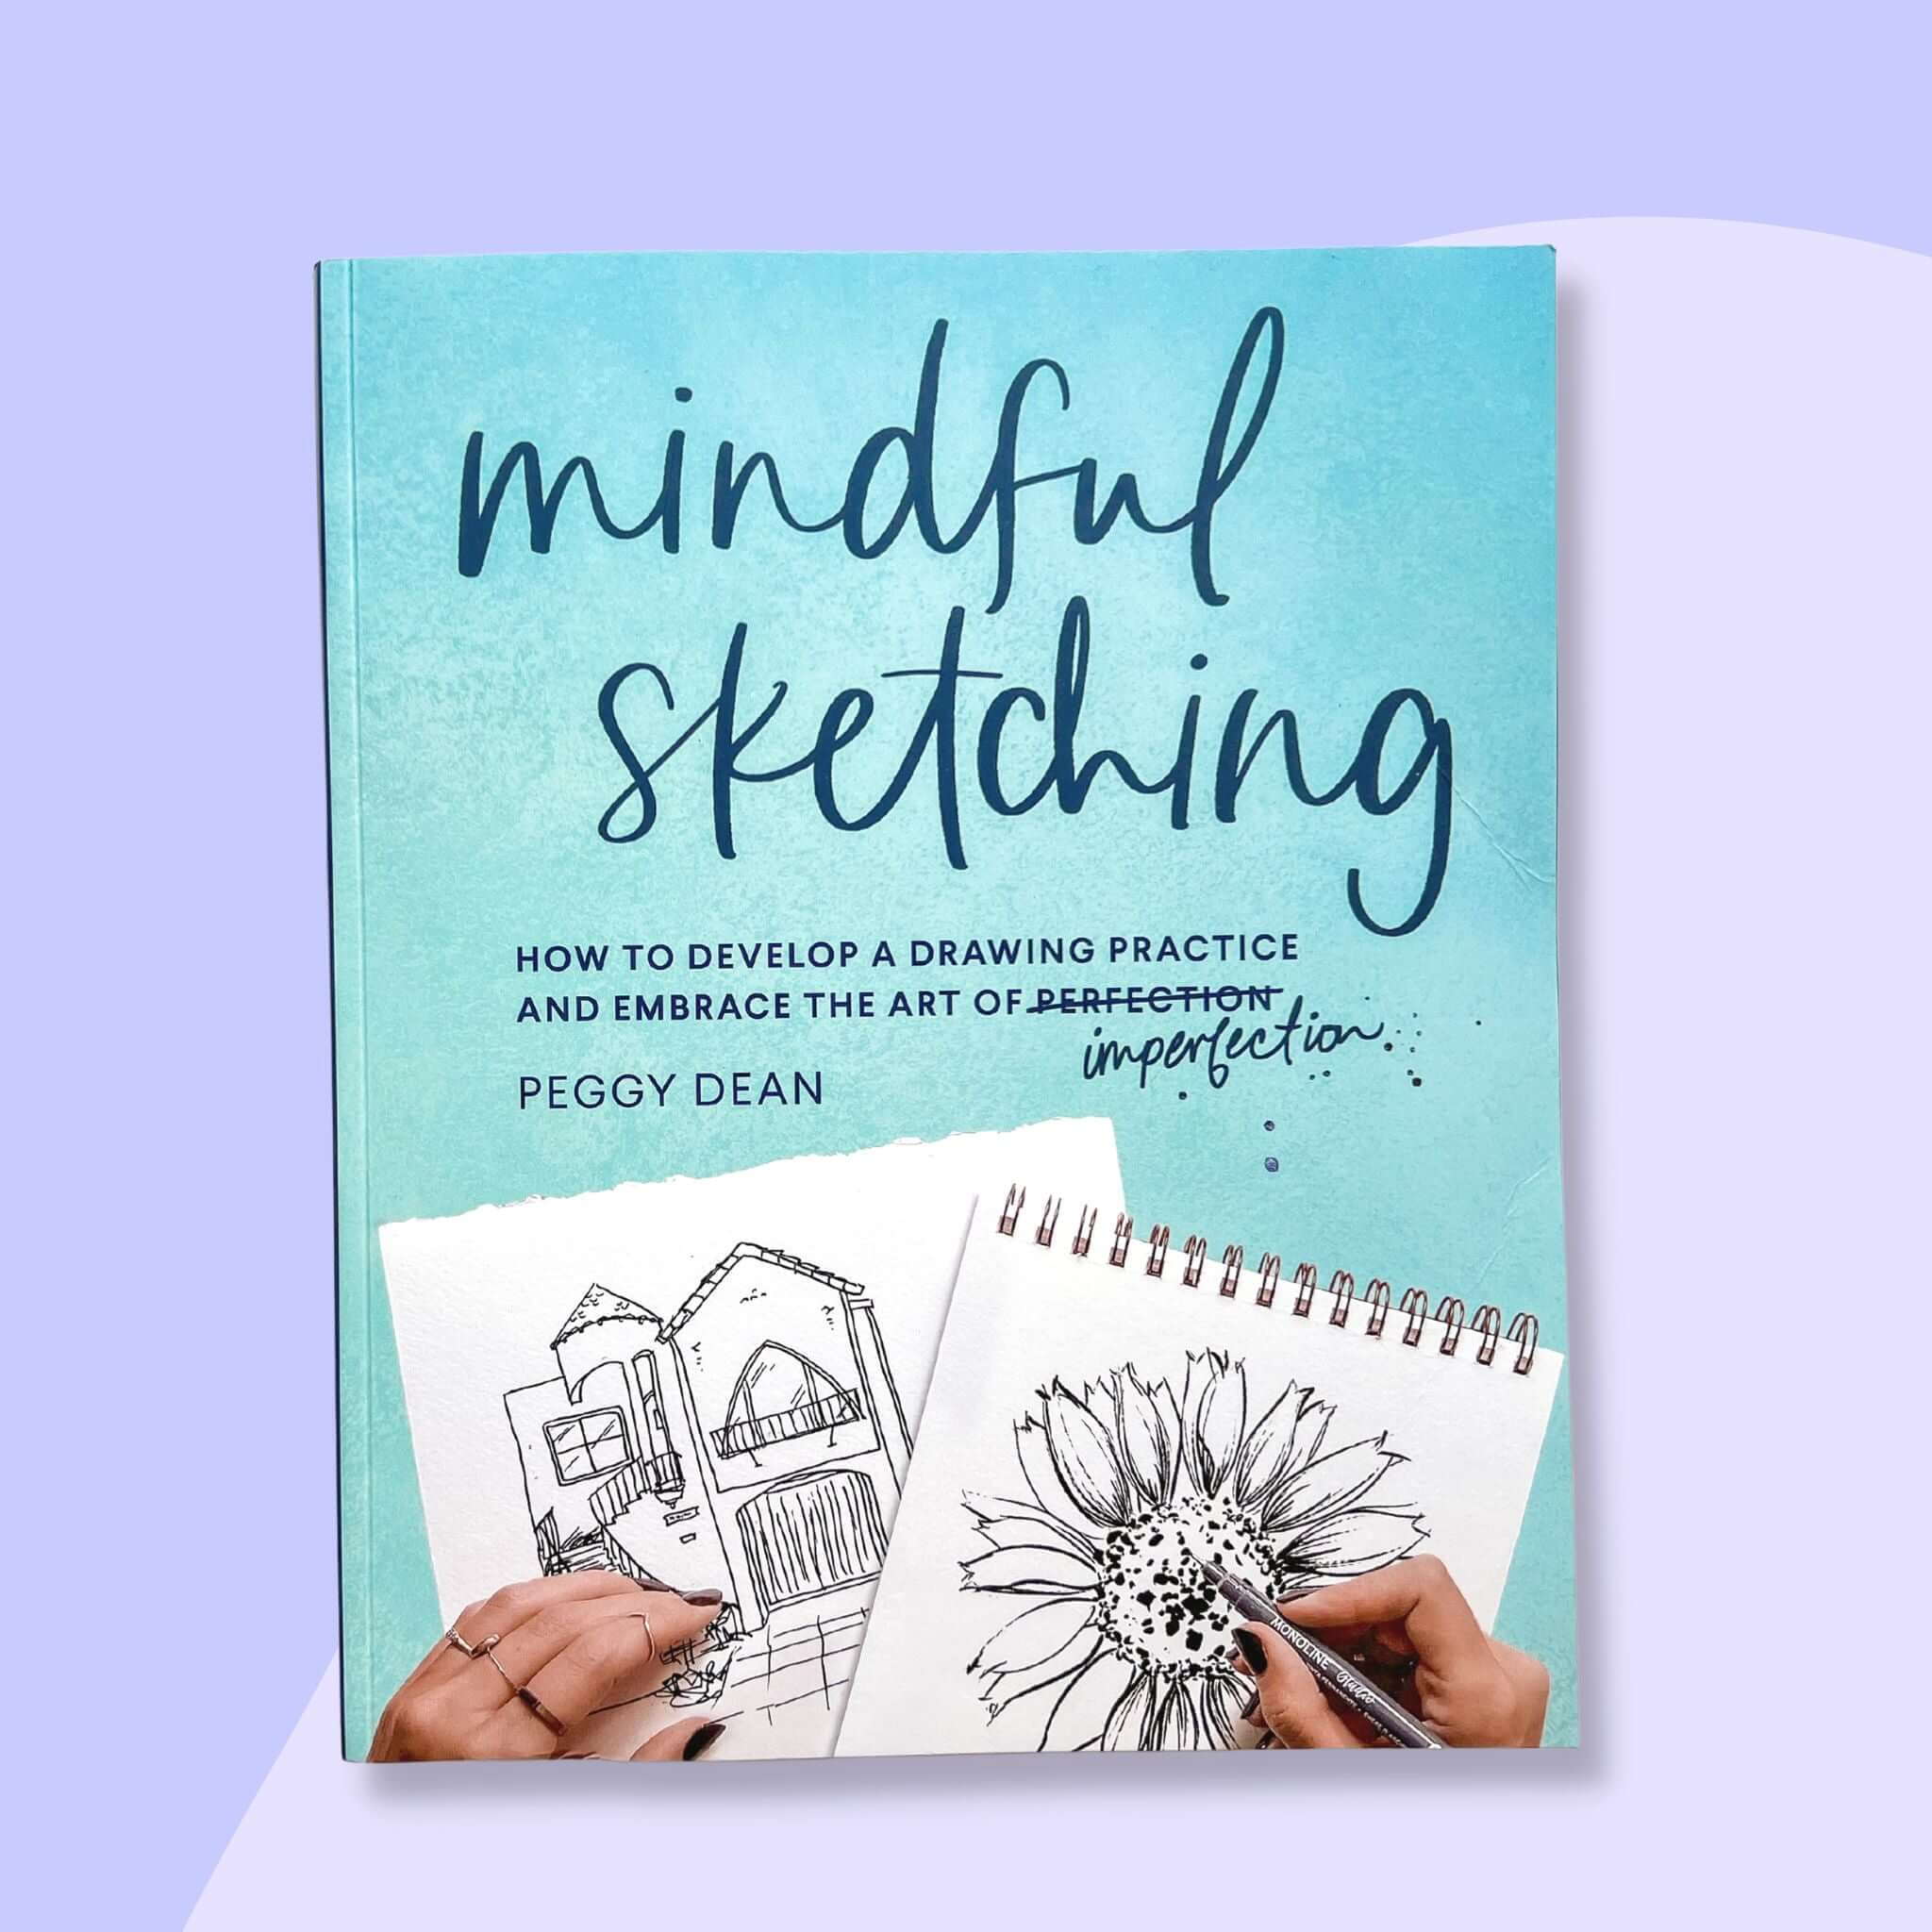 Sketching　Mindful　by　Peggy　Dean